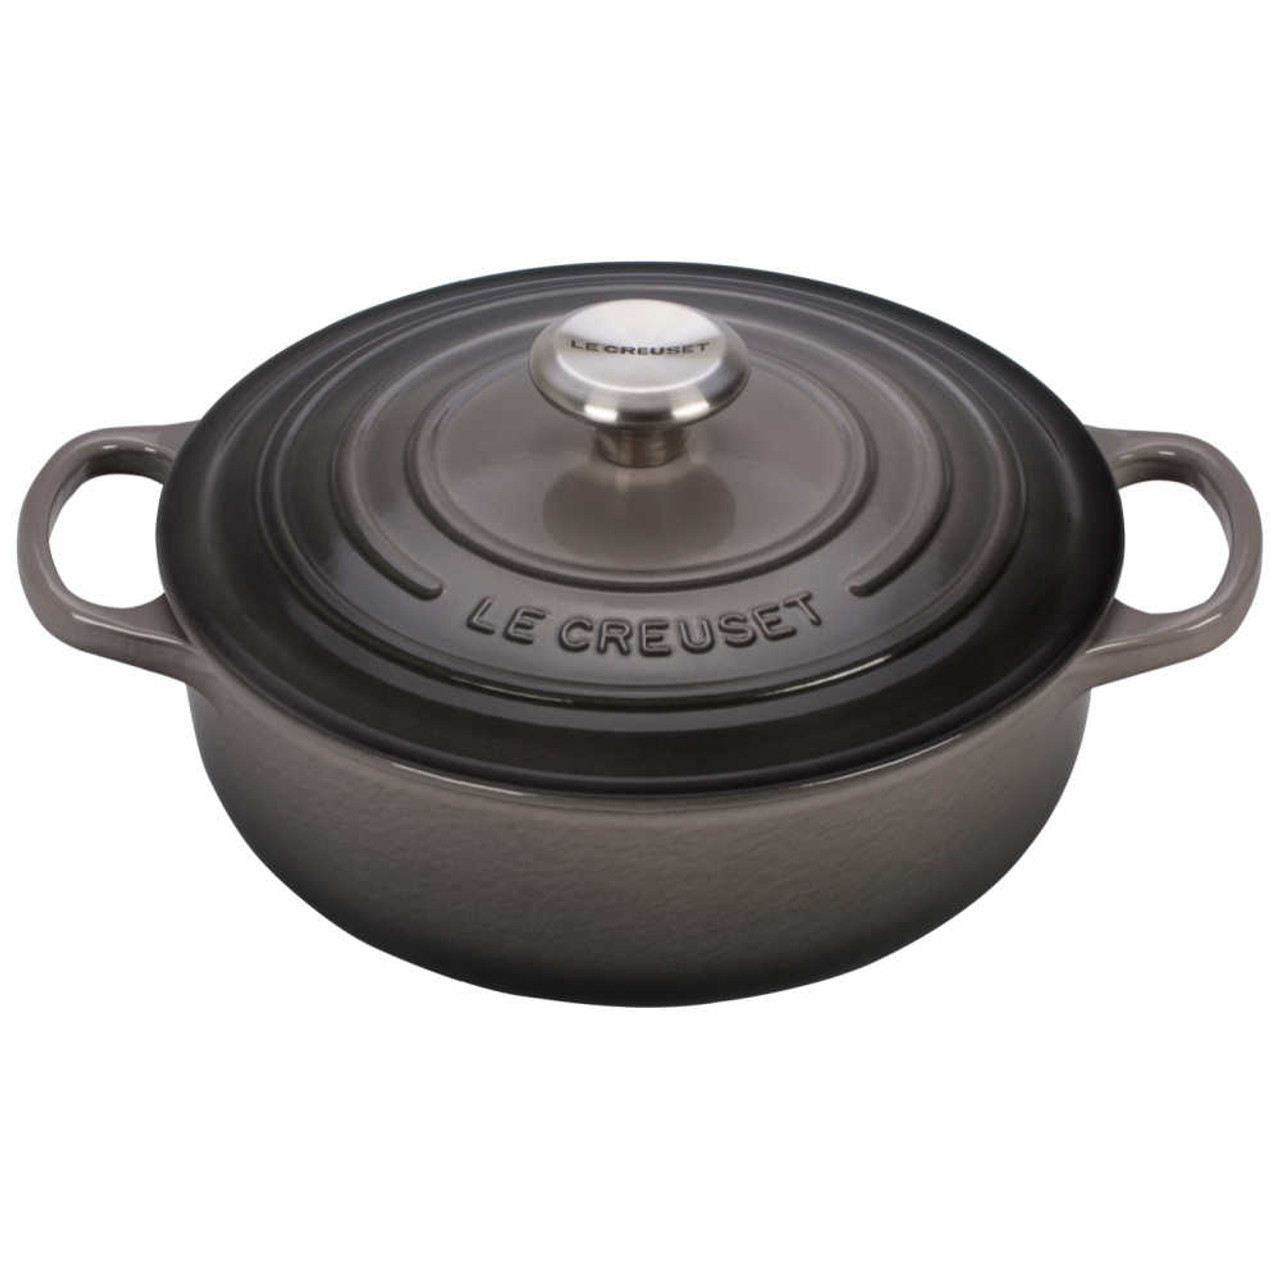 Le Creuset Signature Sauteuse in Oyster | Chefs Corner Store